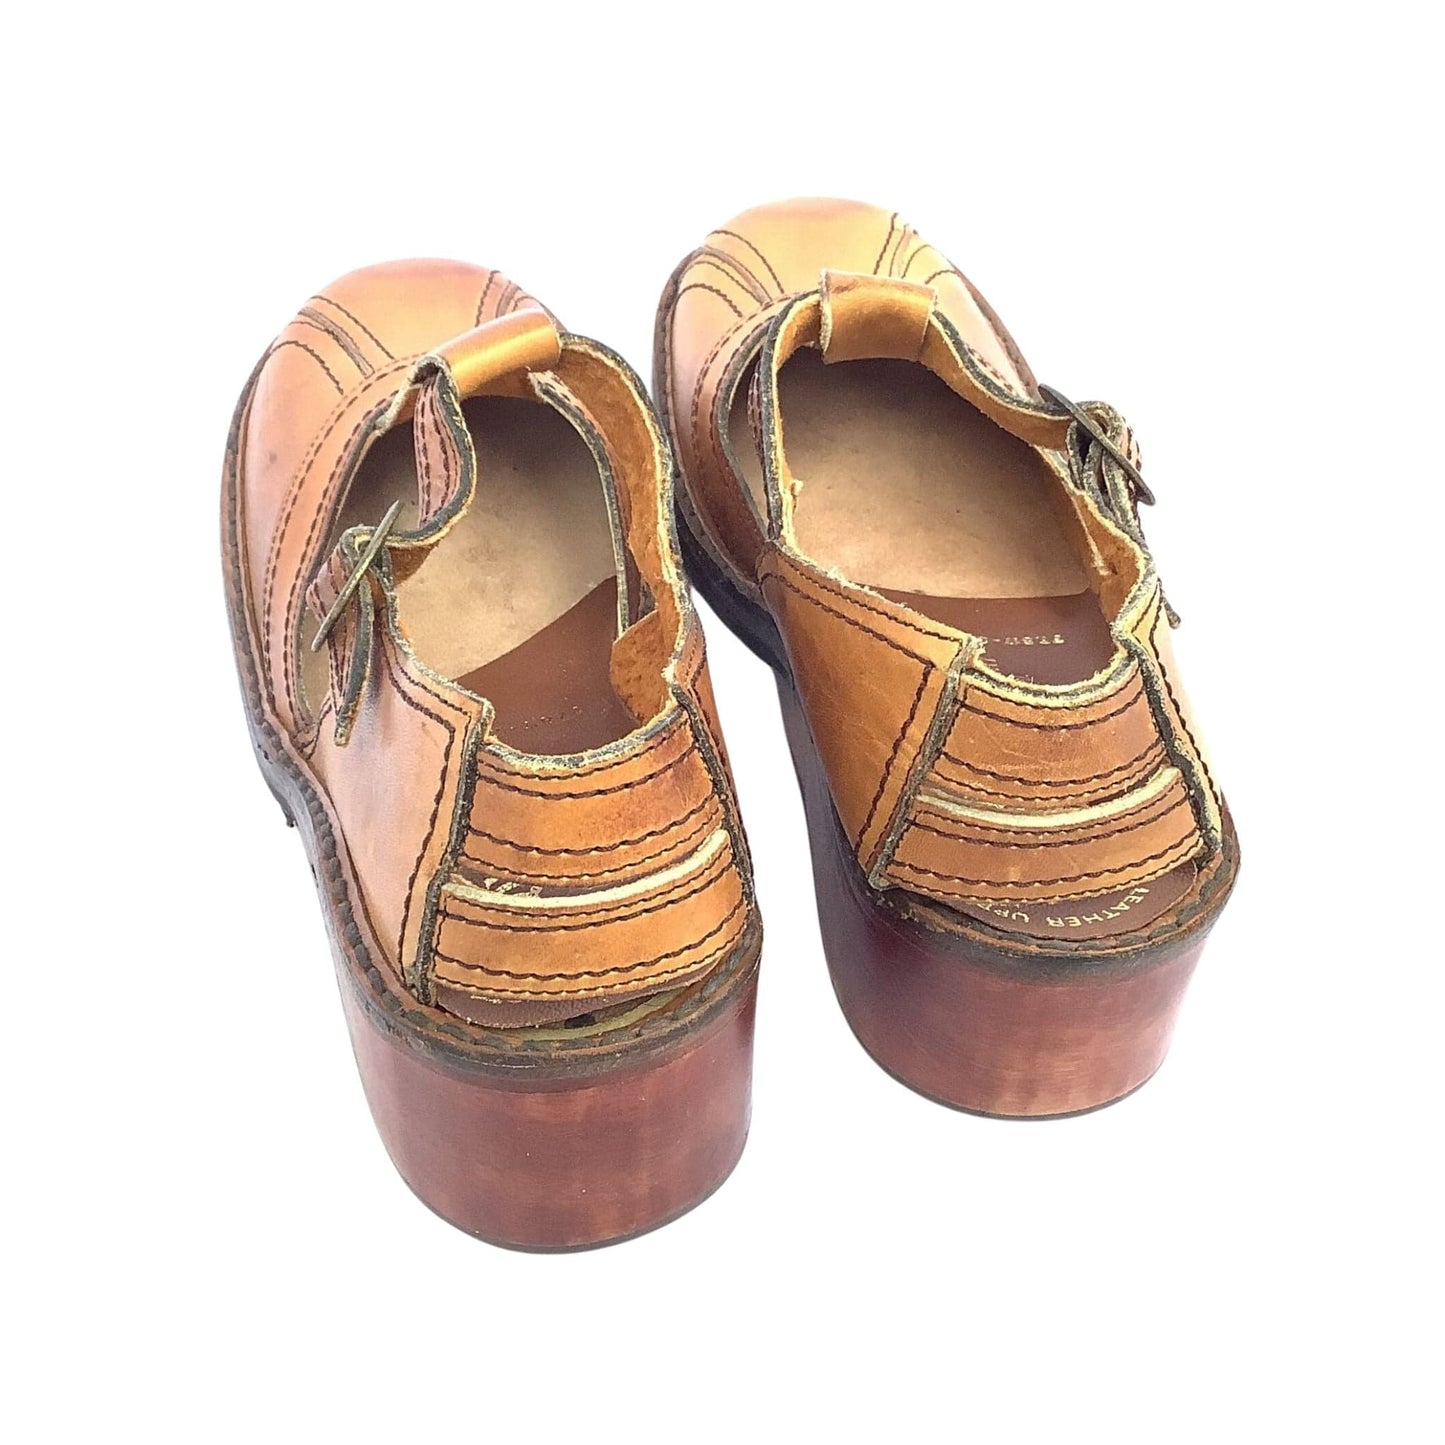 1970s Chunky Mary Jane Shoes 6.5 / Tan / Vintage 1970s